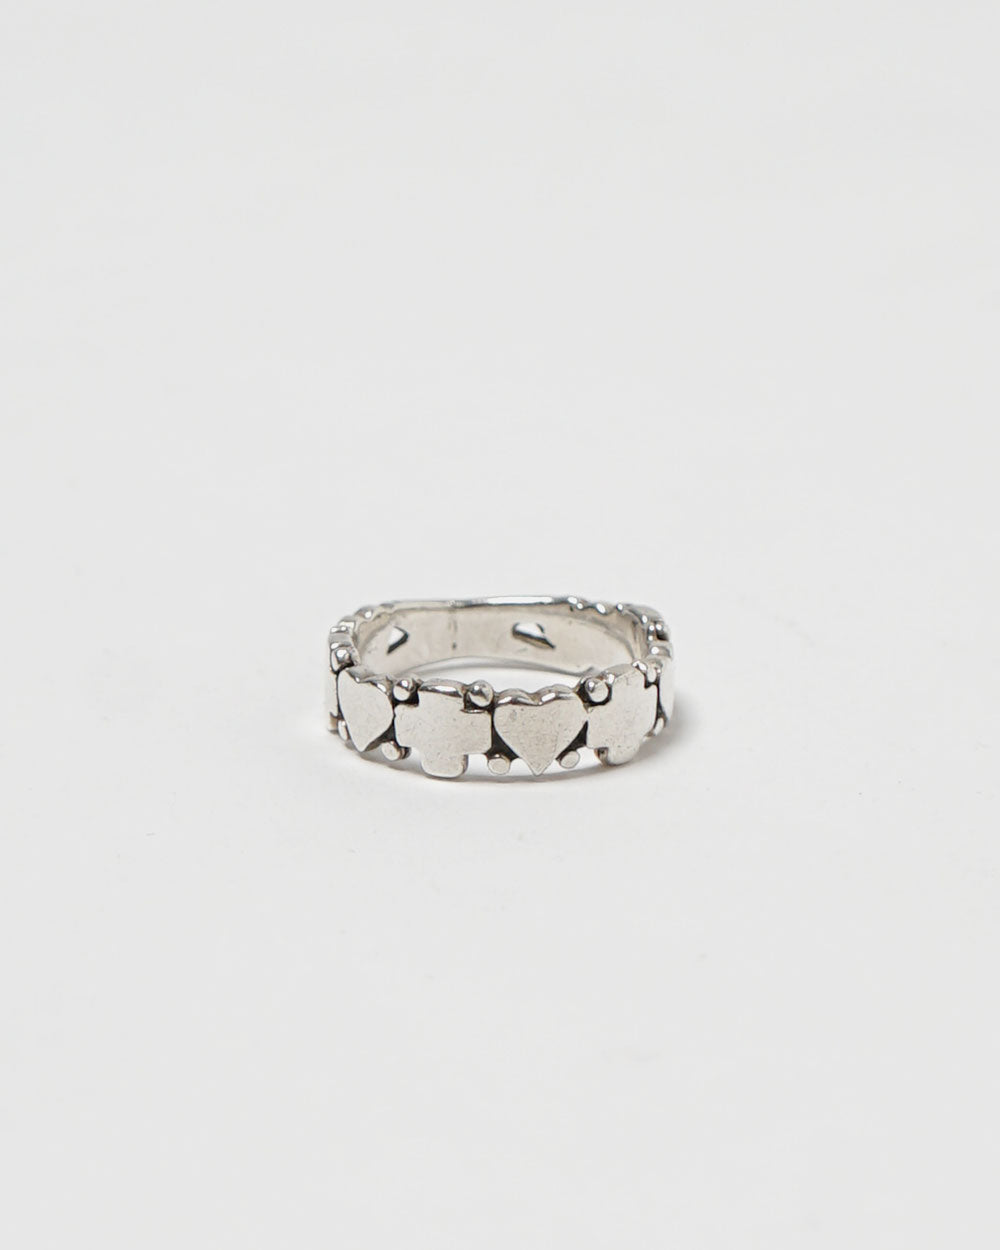 Silver Ring / size: 6.75